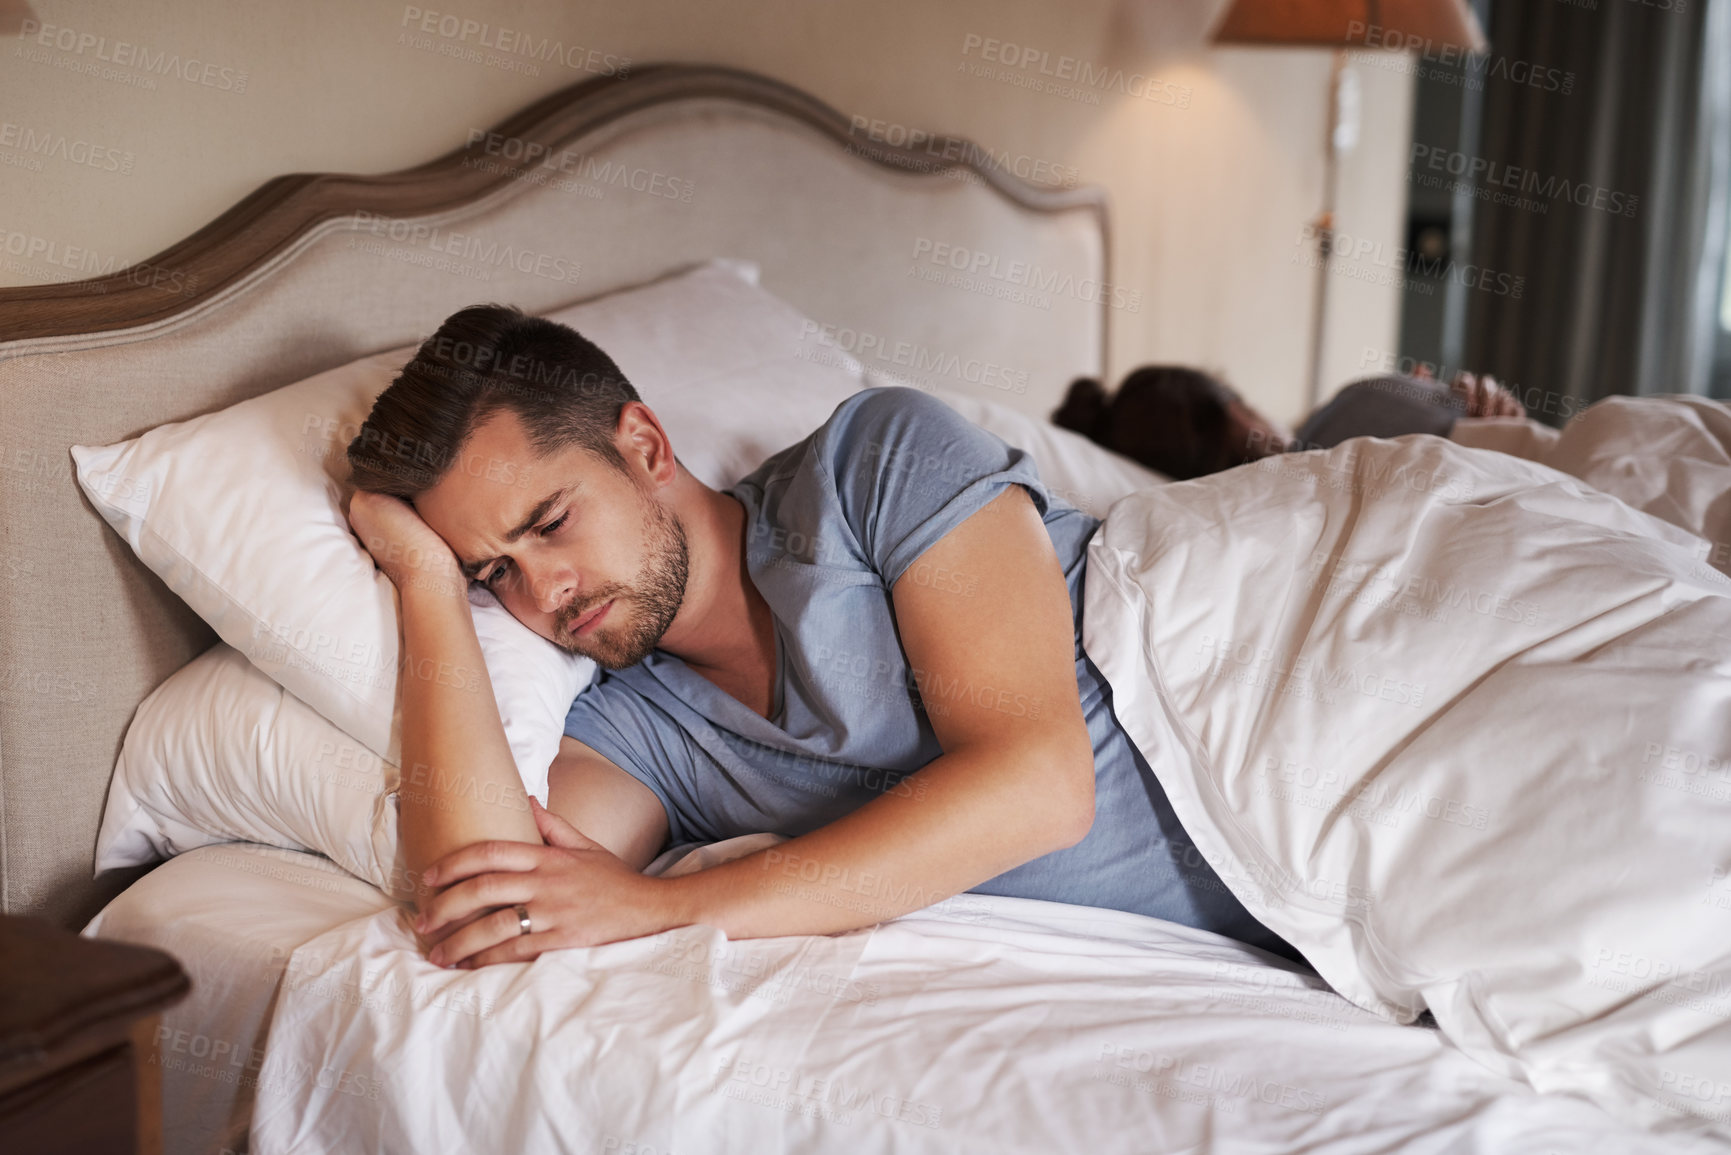 Buy stock photo Shot of a young man looking concerned while his girlfriend sleeps in the background in their bed at home